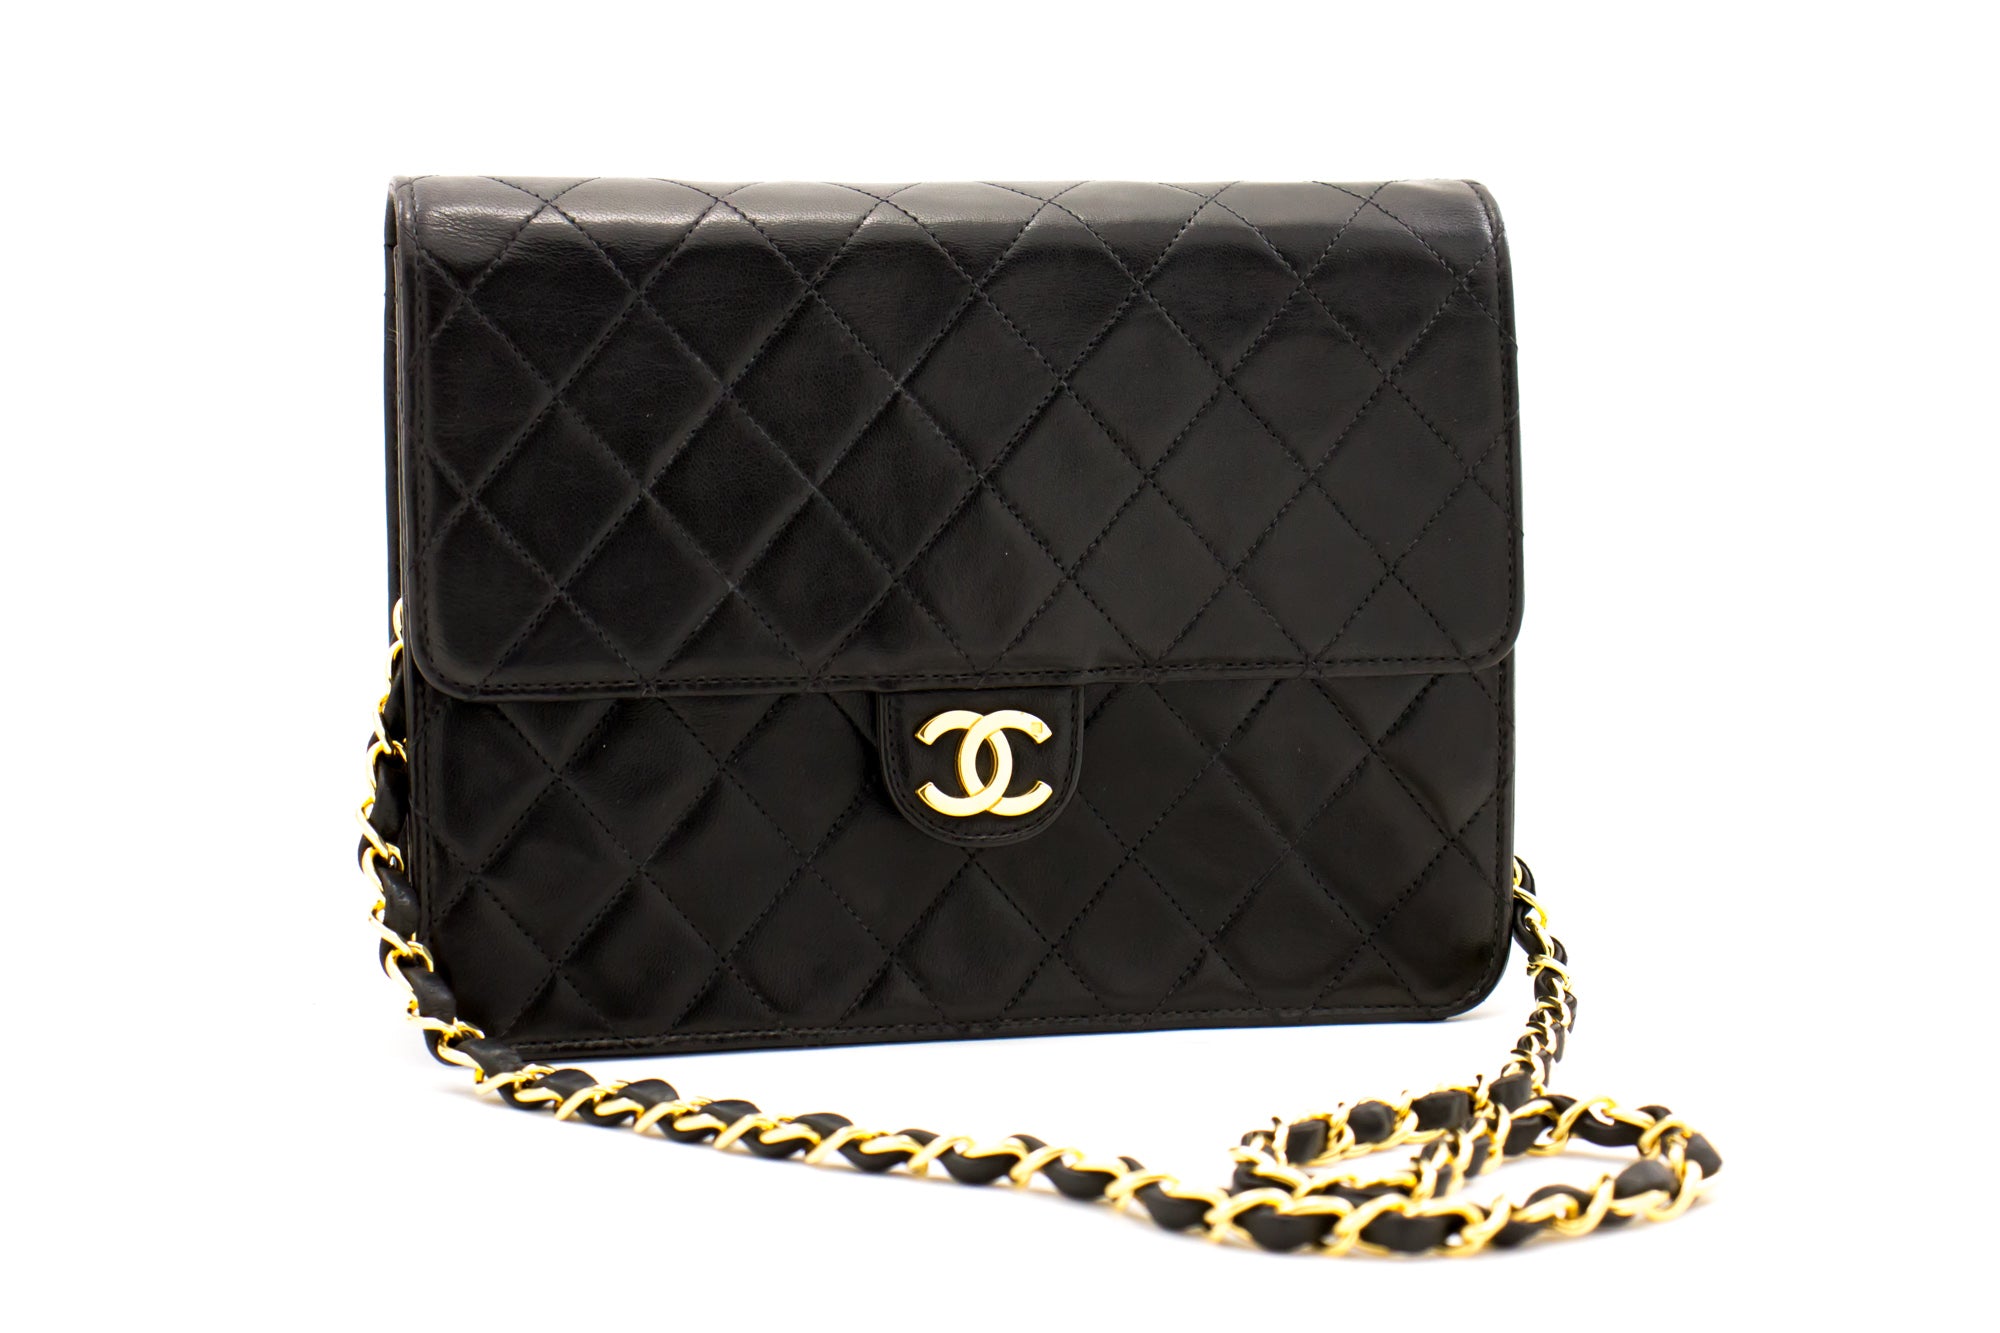 CHANEL Small Chain Shoulder Clutch Black Quilted Flap Lambskin d22 – hannari-shop